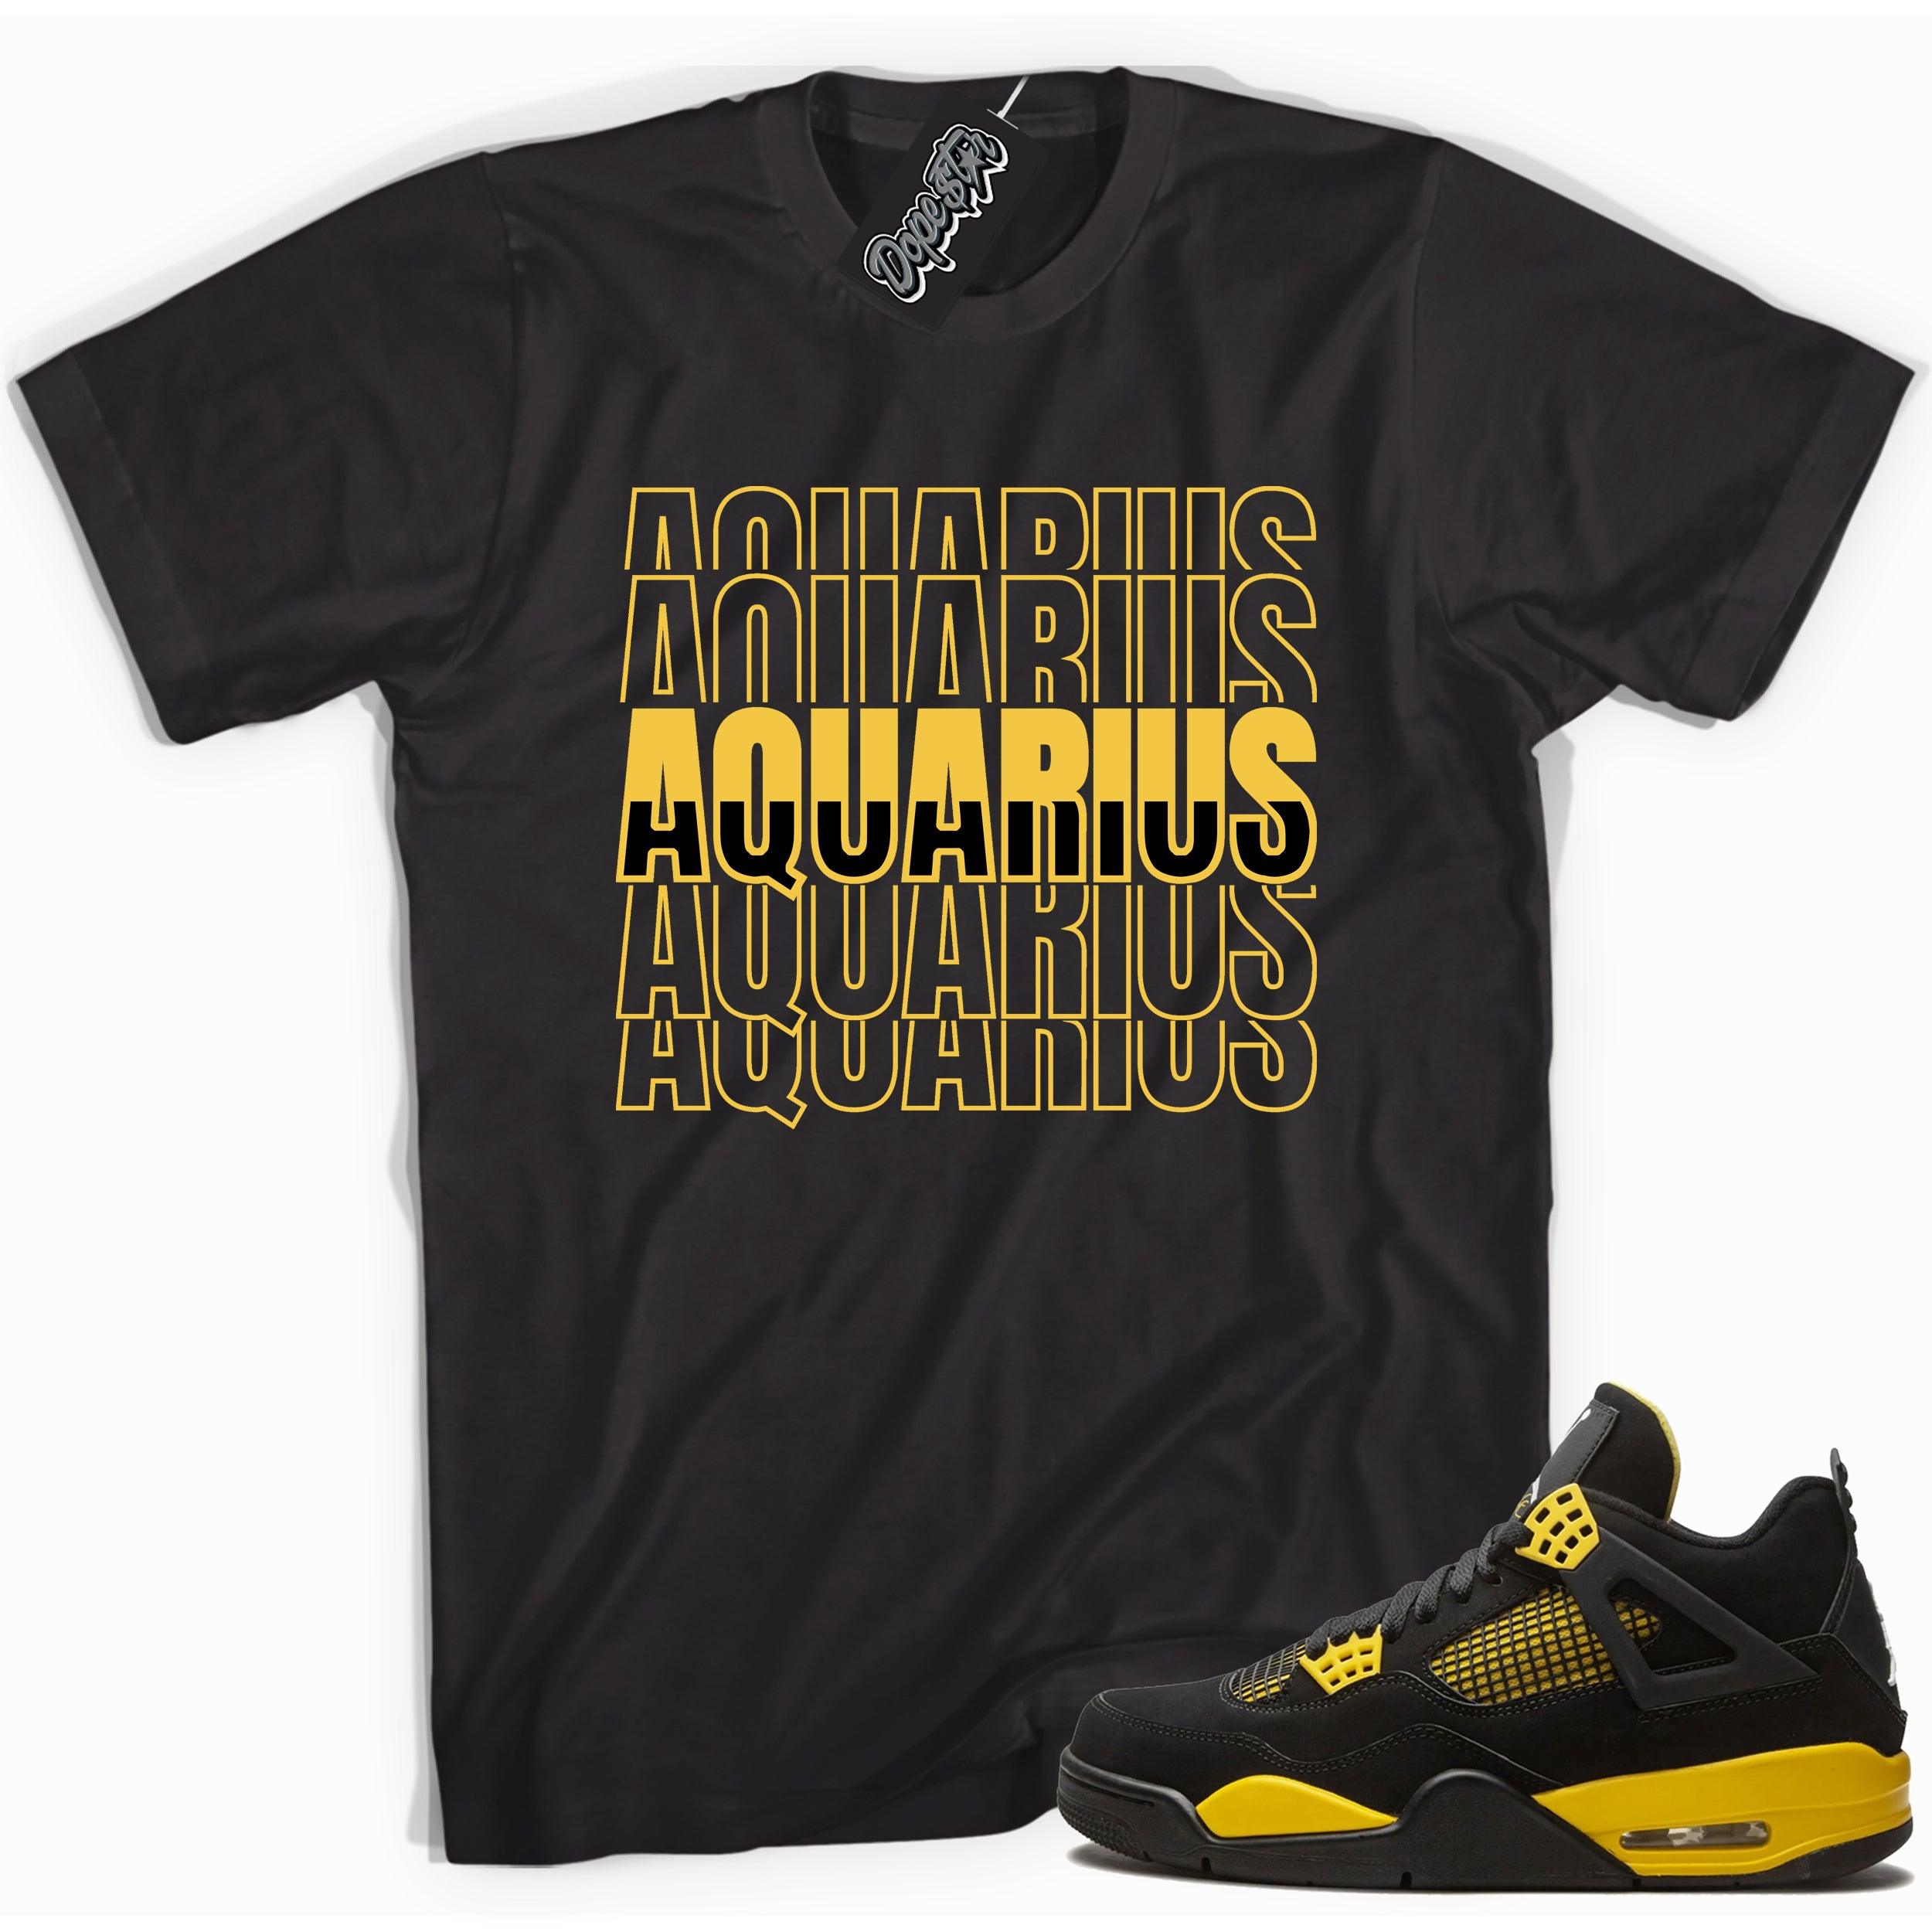 Cool black graphic tee with 'aquarius' print, that perfectly matches  Air Jordan 4 Thunder sneakers